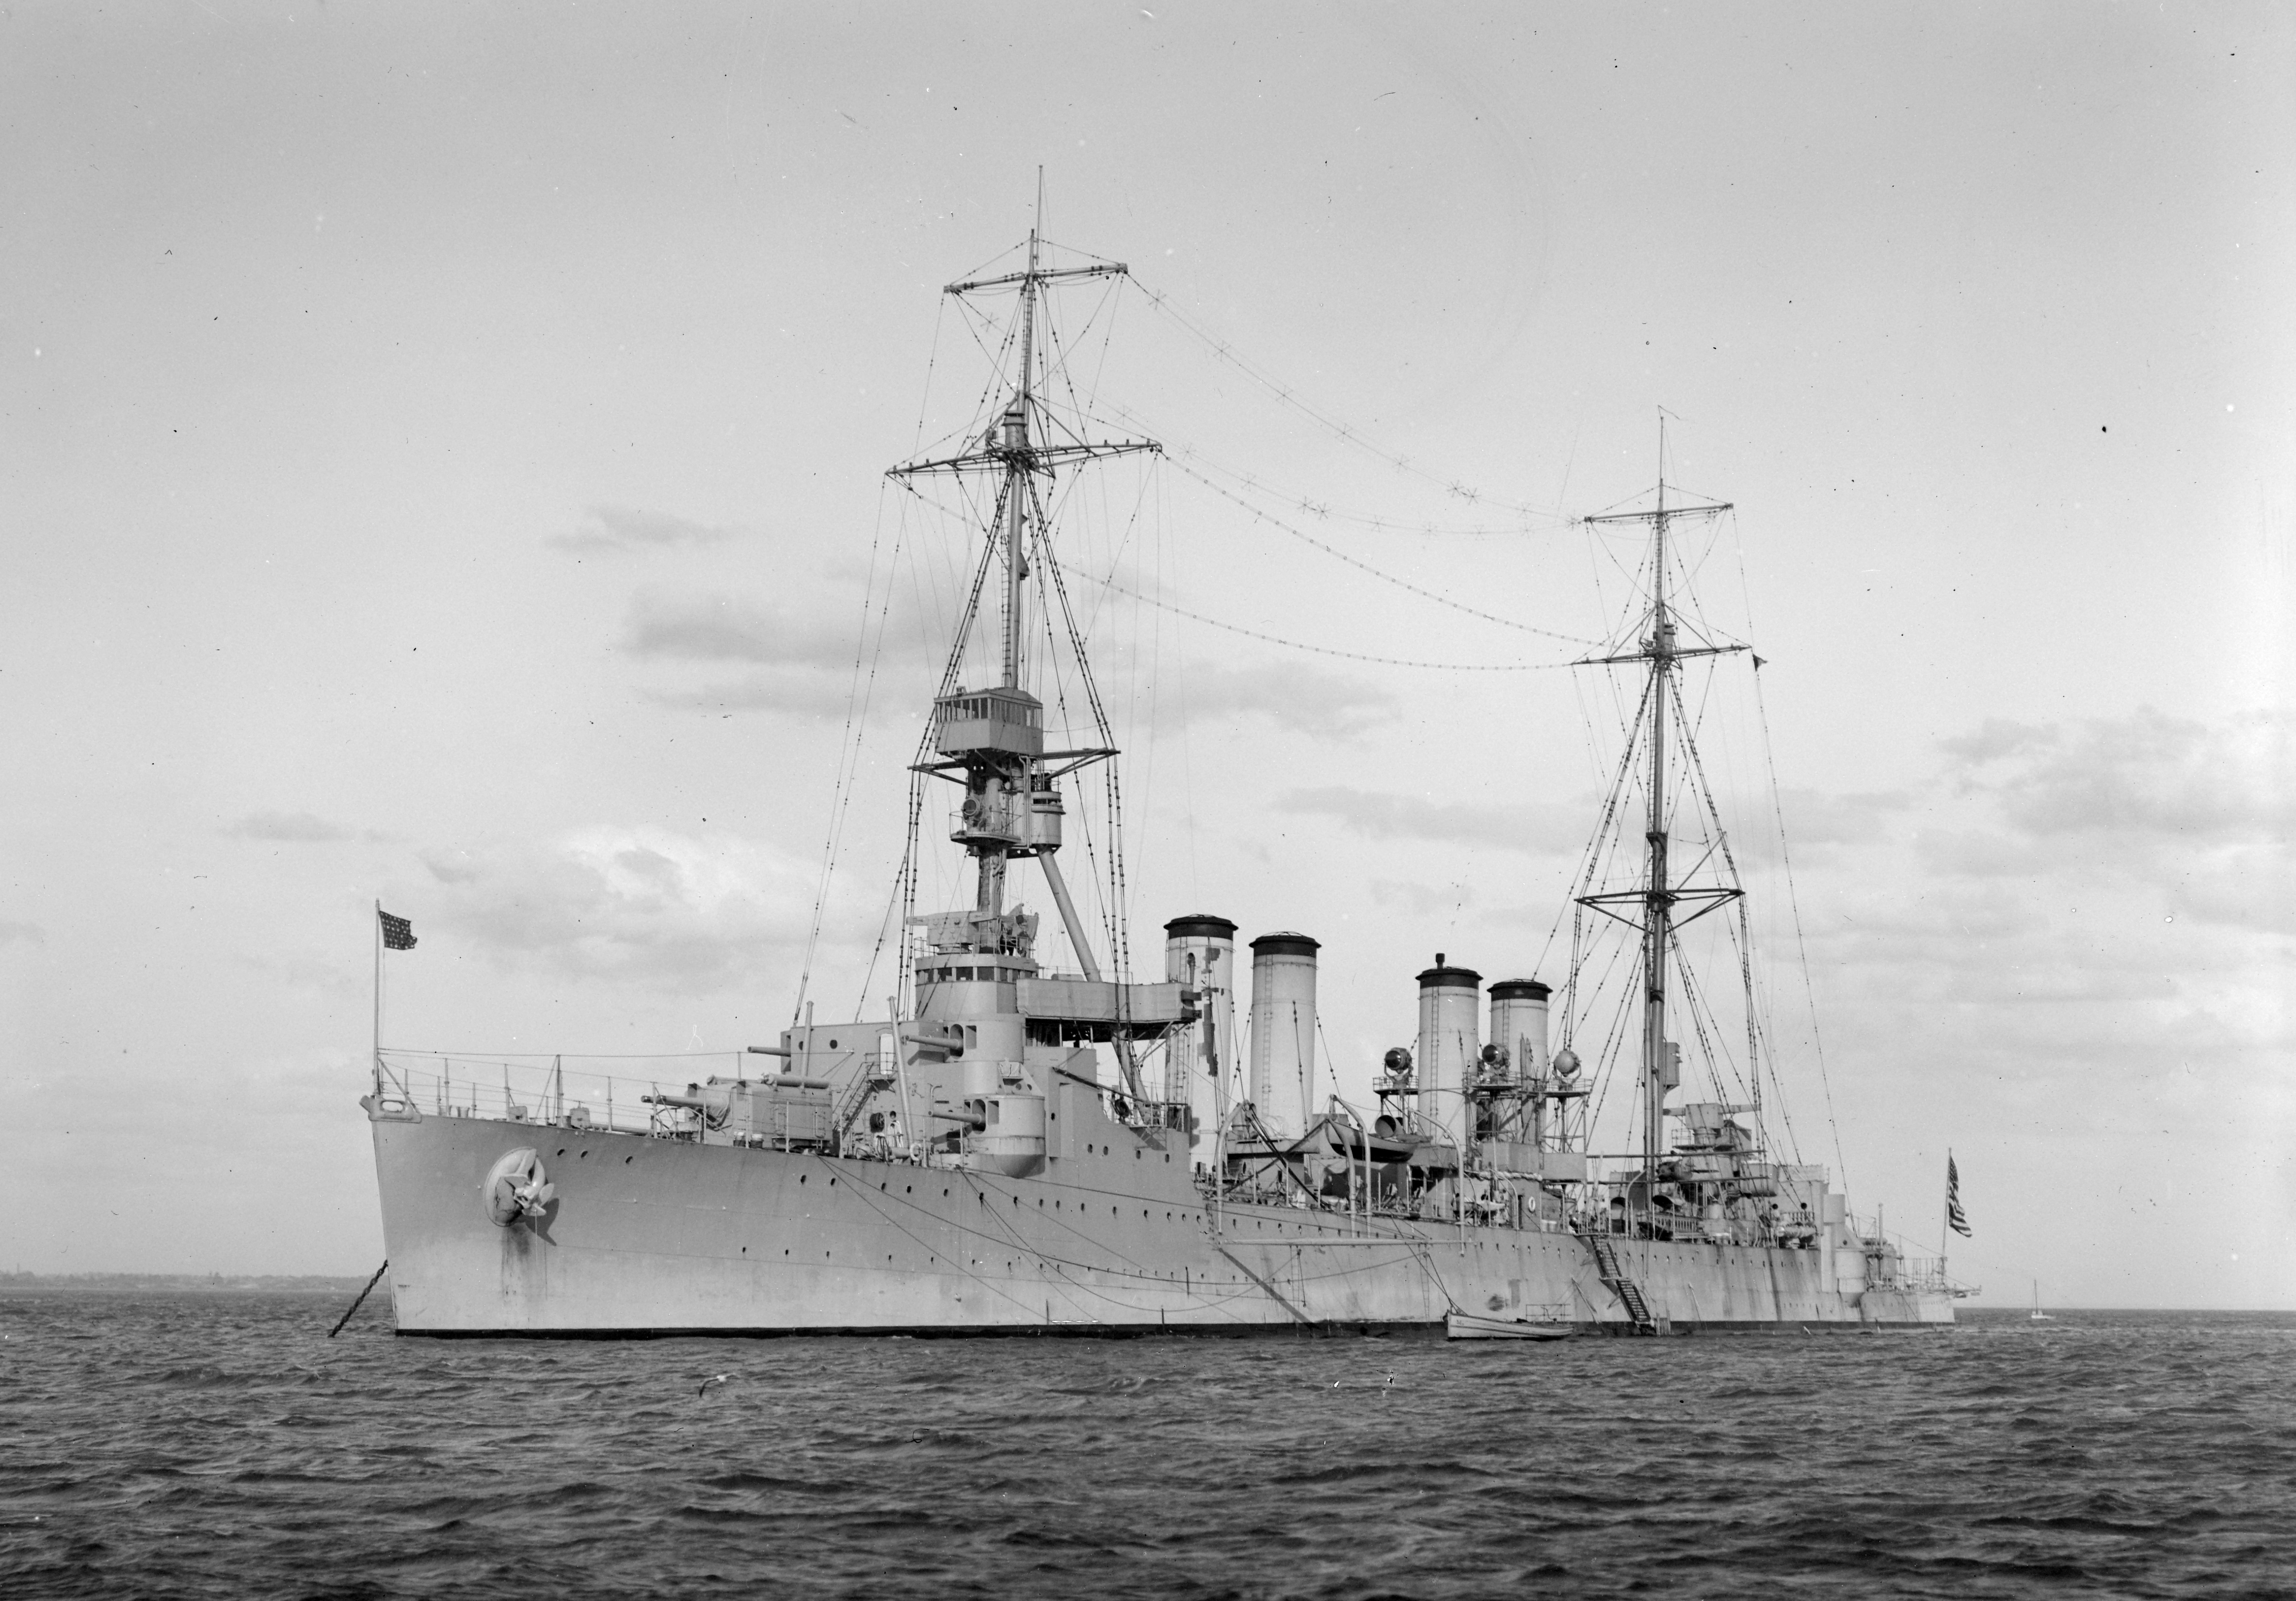 USS_Memphis_(CL-13)_at_anchor_in_Australian_waters,_in_the_1920s_(SLV_H91.325.415).jpg